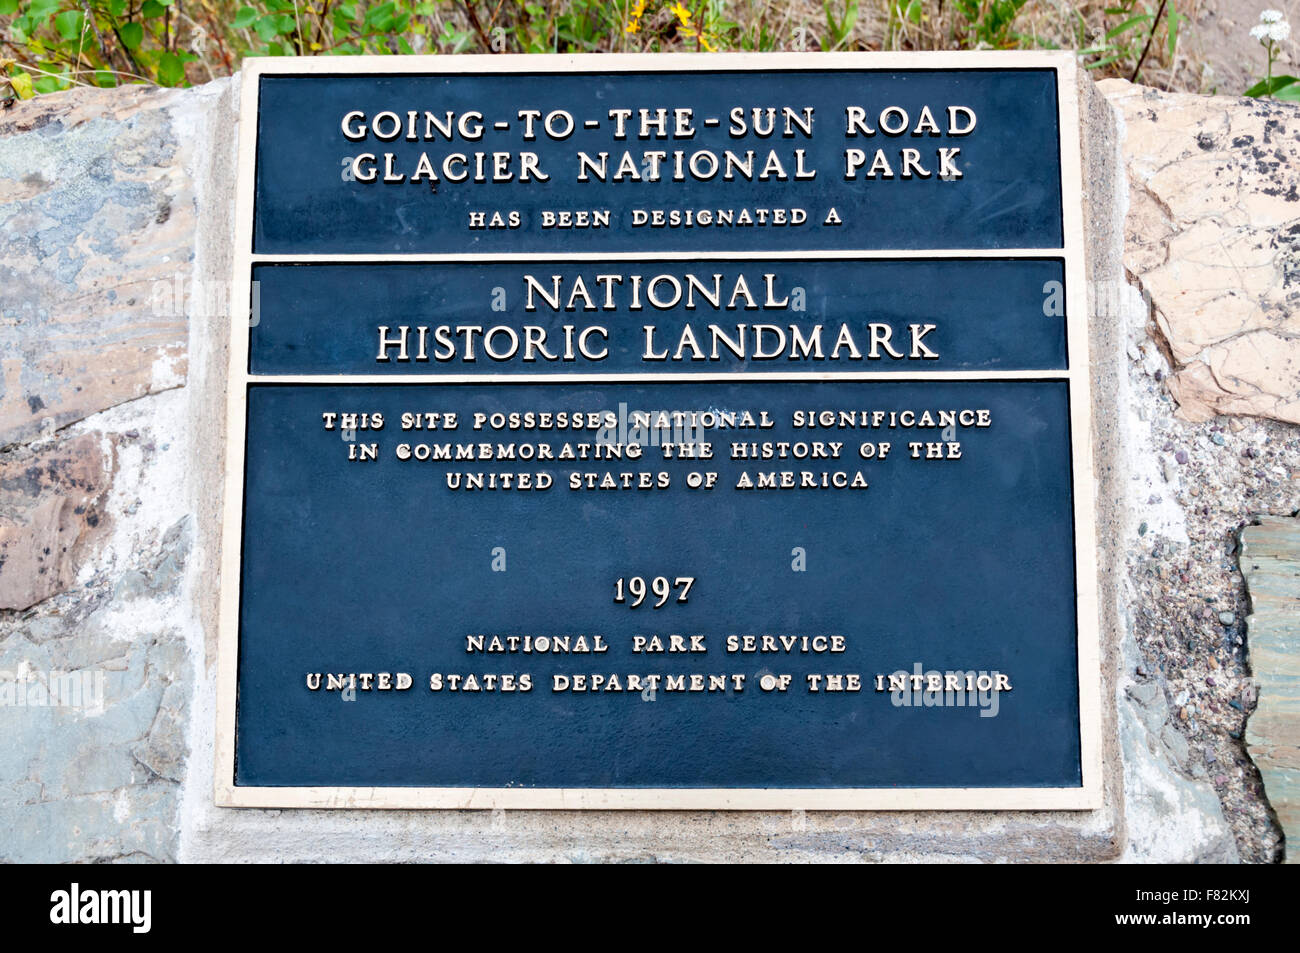 A plaque recording the designation of the Going-To-The-Sun Road in Glacier National Park as a National Historic Landmark. Stock Photo